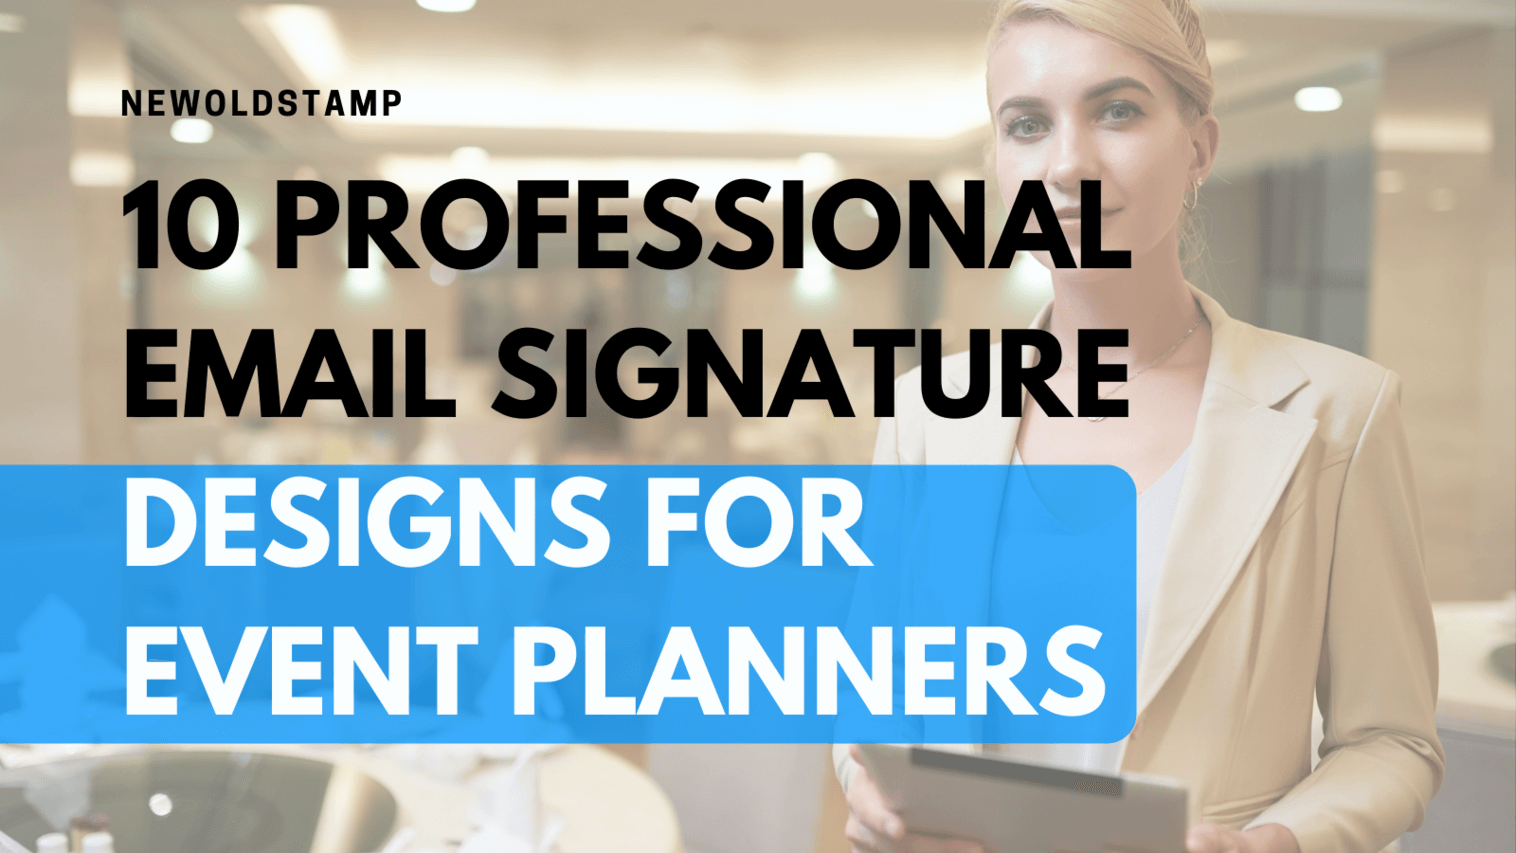 10 Professional Email Signature Designs for Event Planners